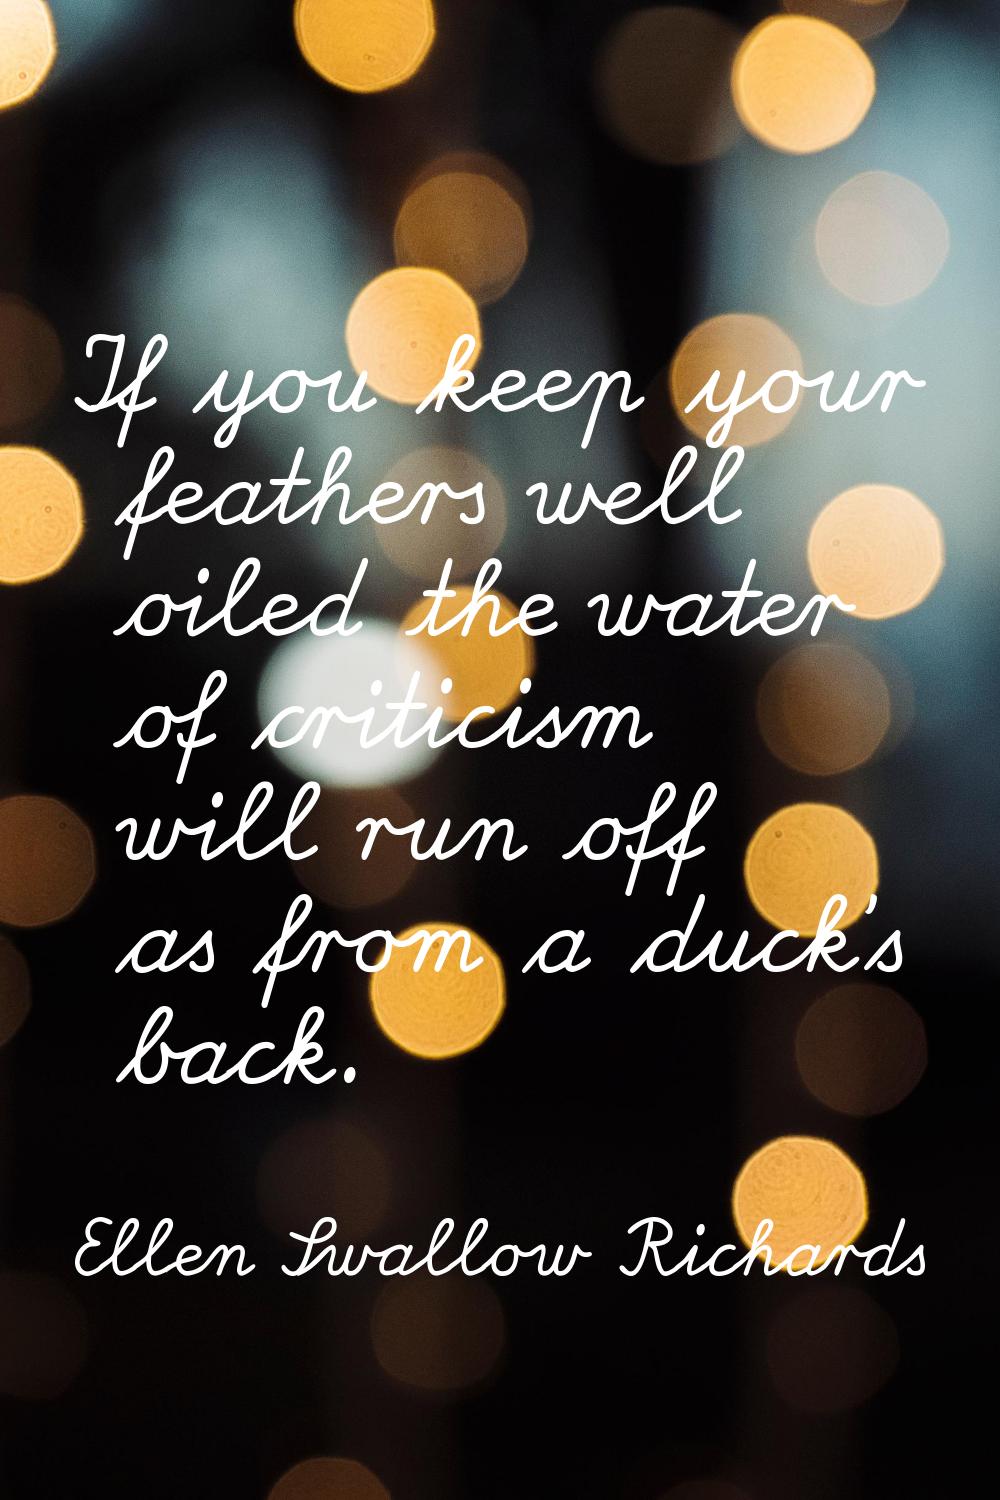 If you keep your feathers well oiled the water of criticism will run off as from a duck's back.